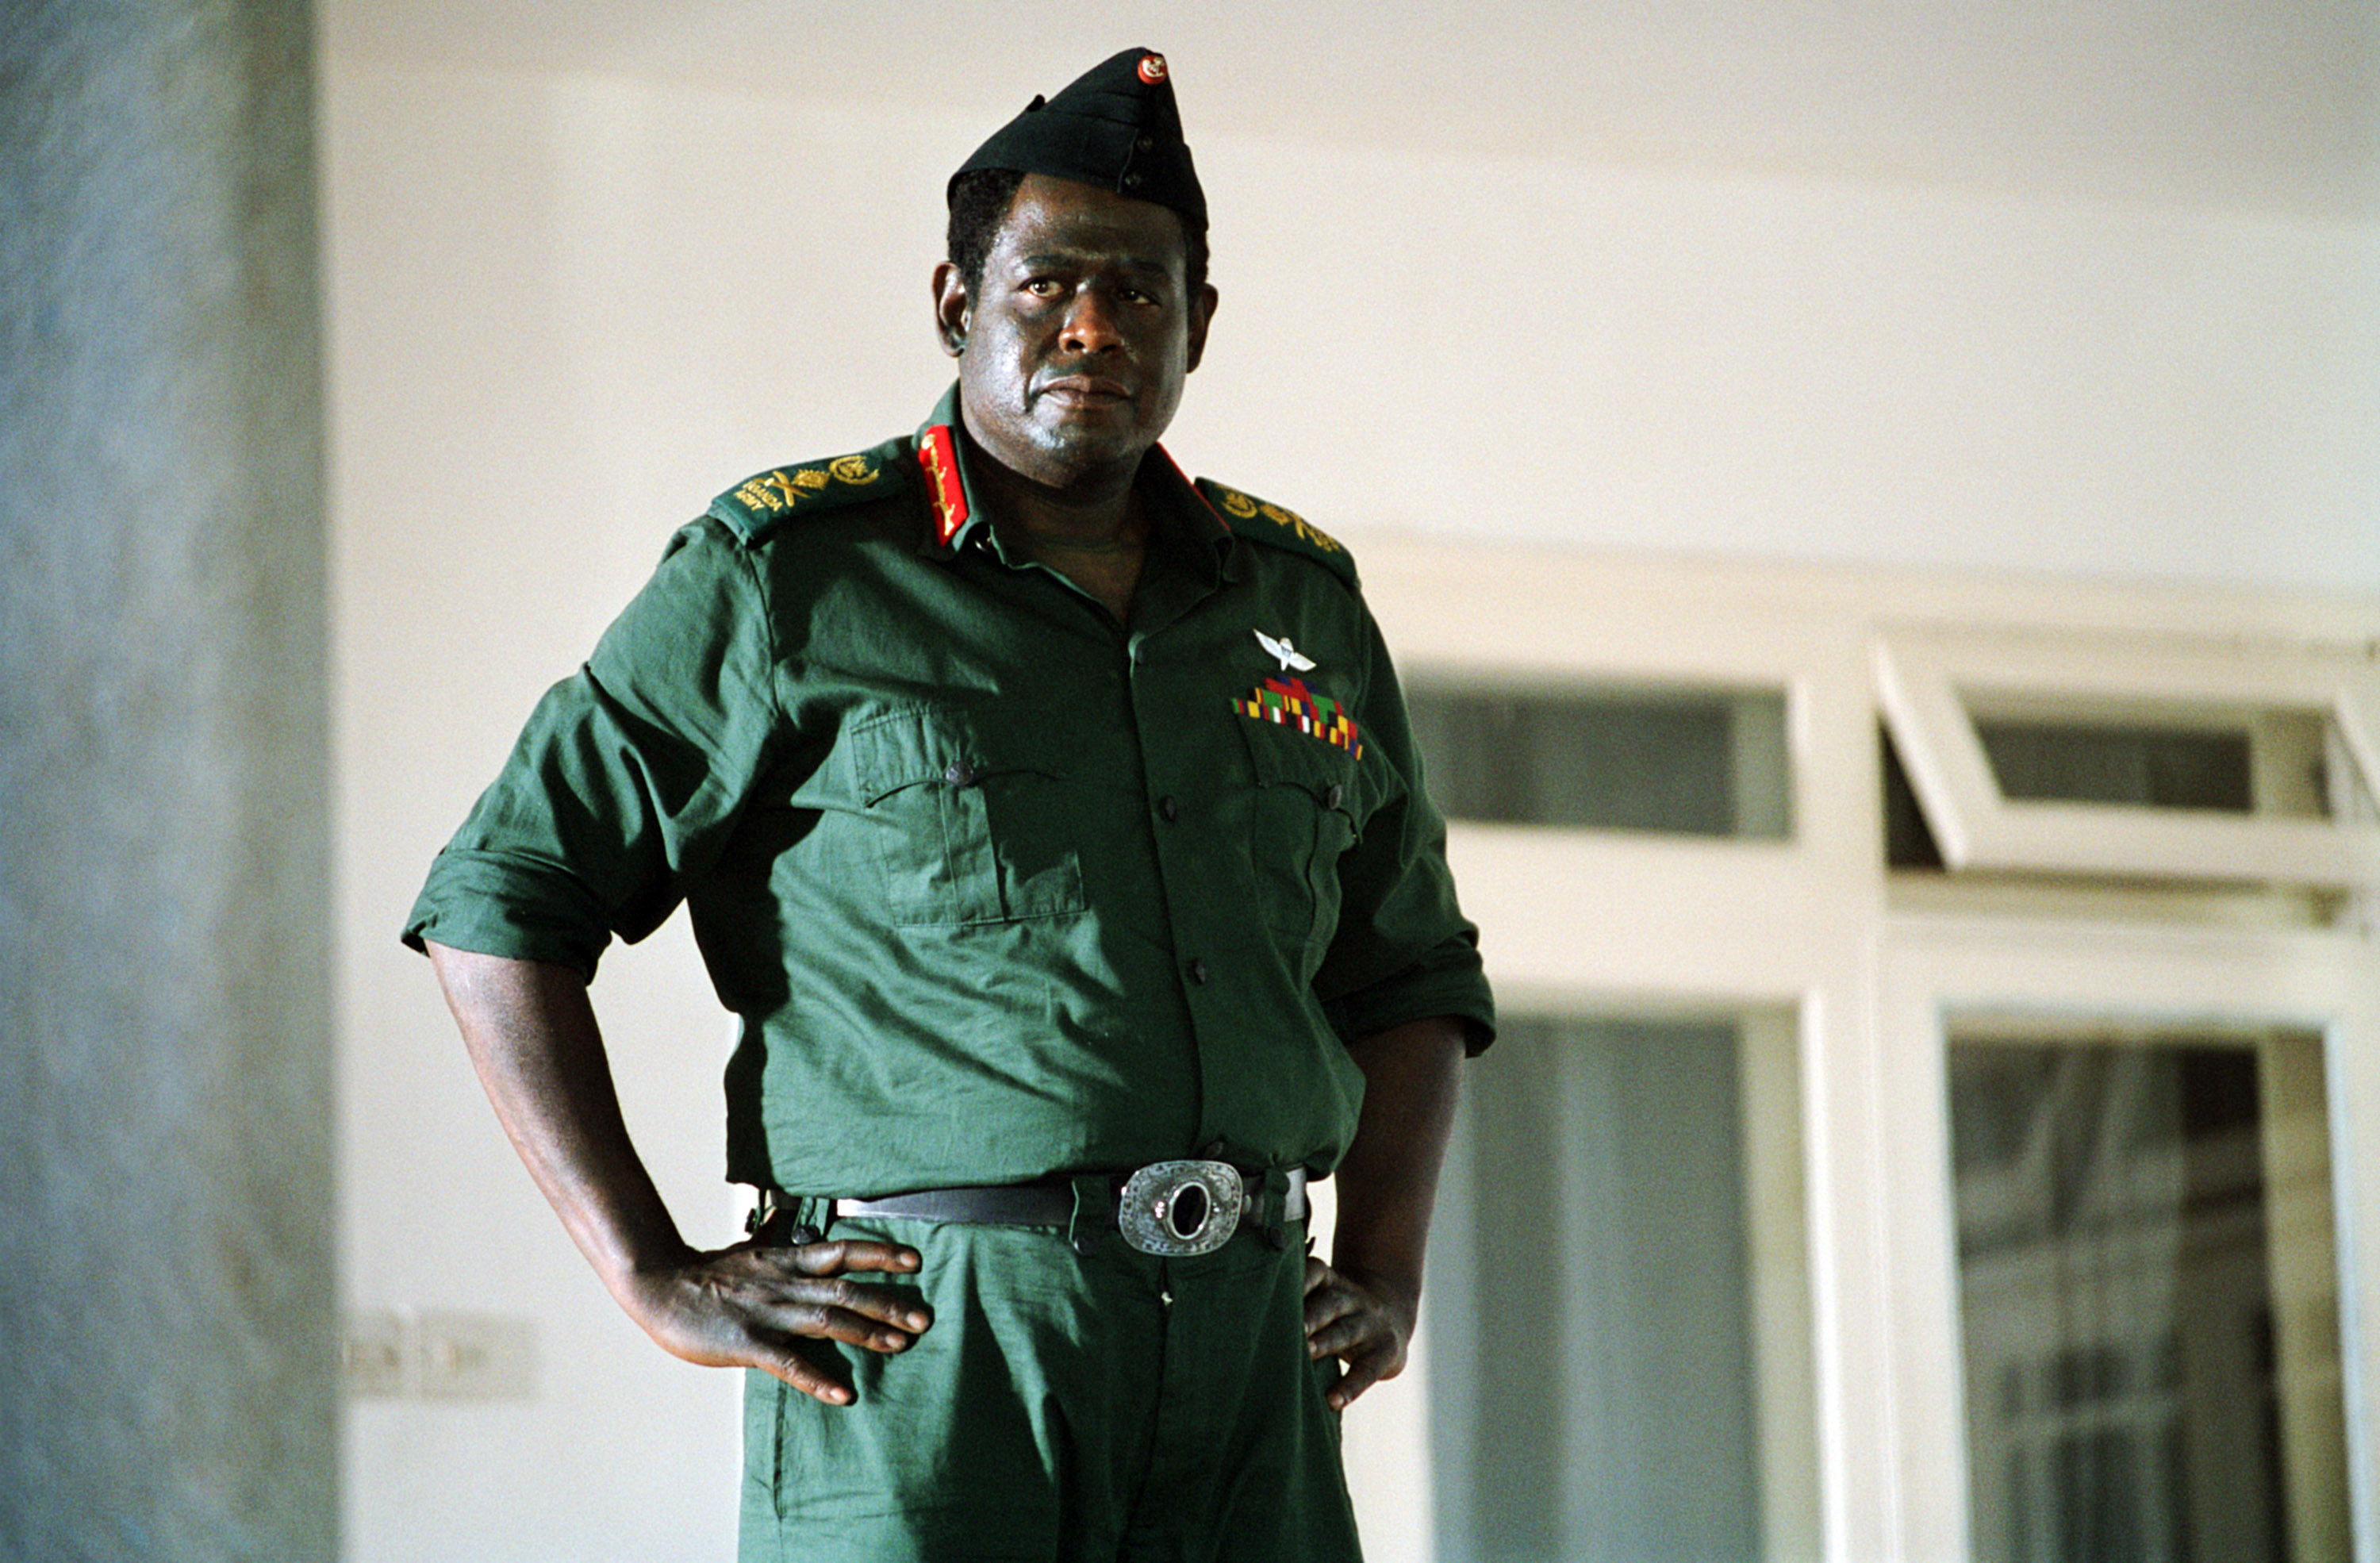 Forest Whitaker stands dressed as Idi Amin